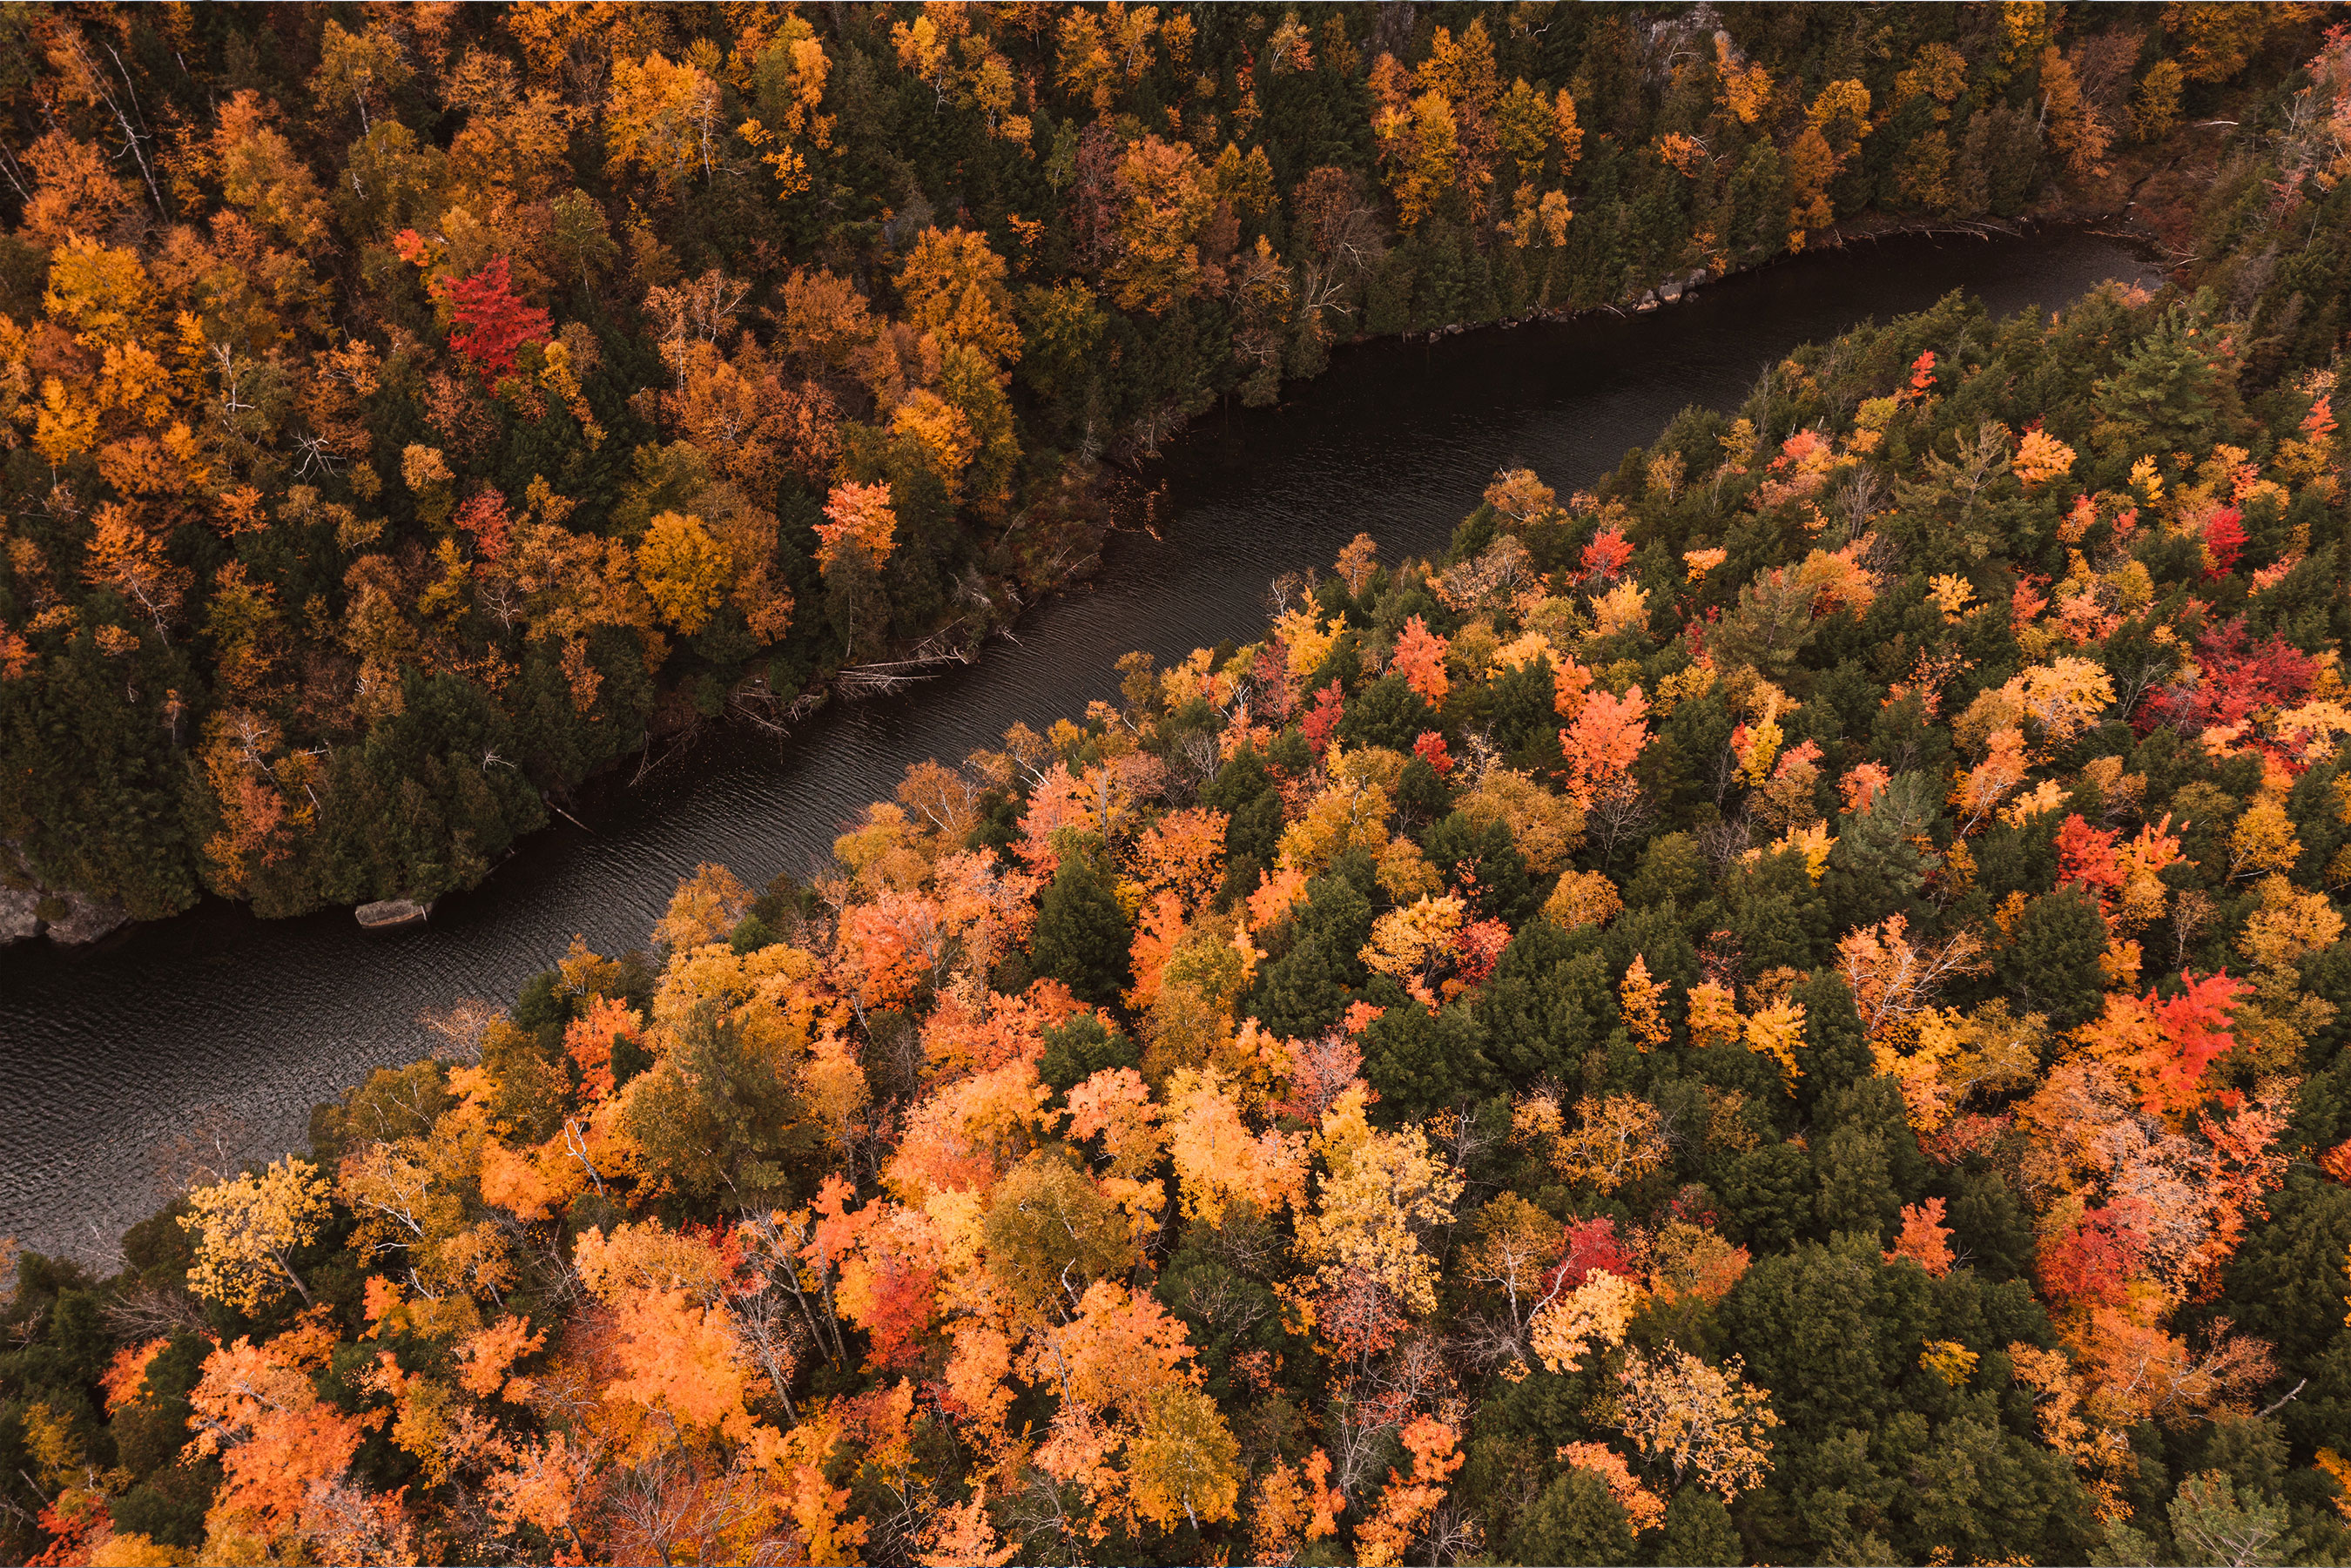 Visit charming upstate New York where the Catskill Mountains provide a colorful autumn backdrop to the picturesque Hudson River.